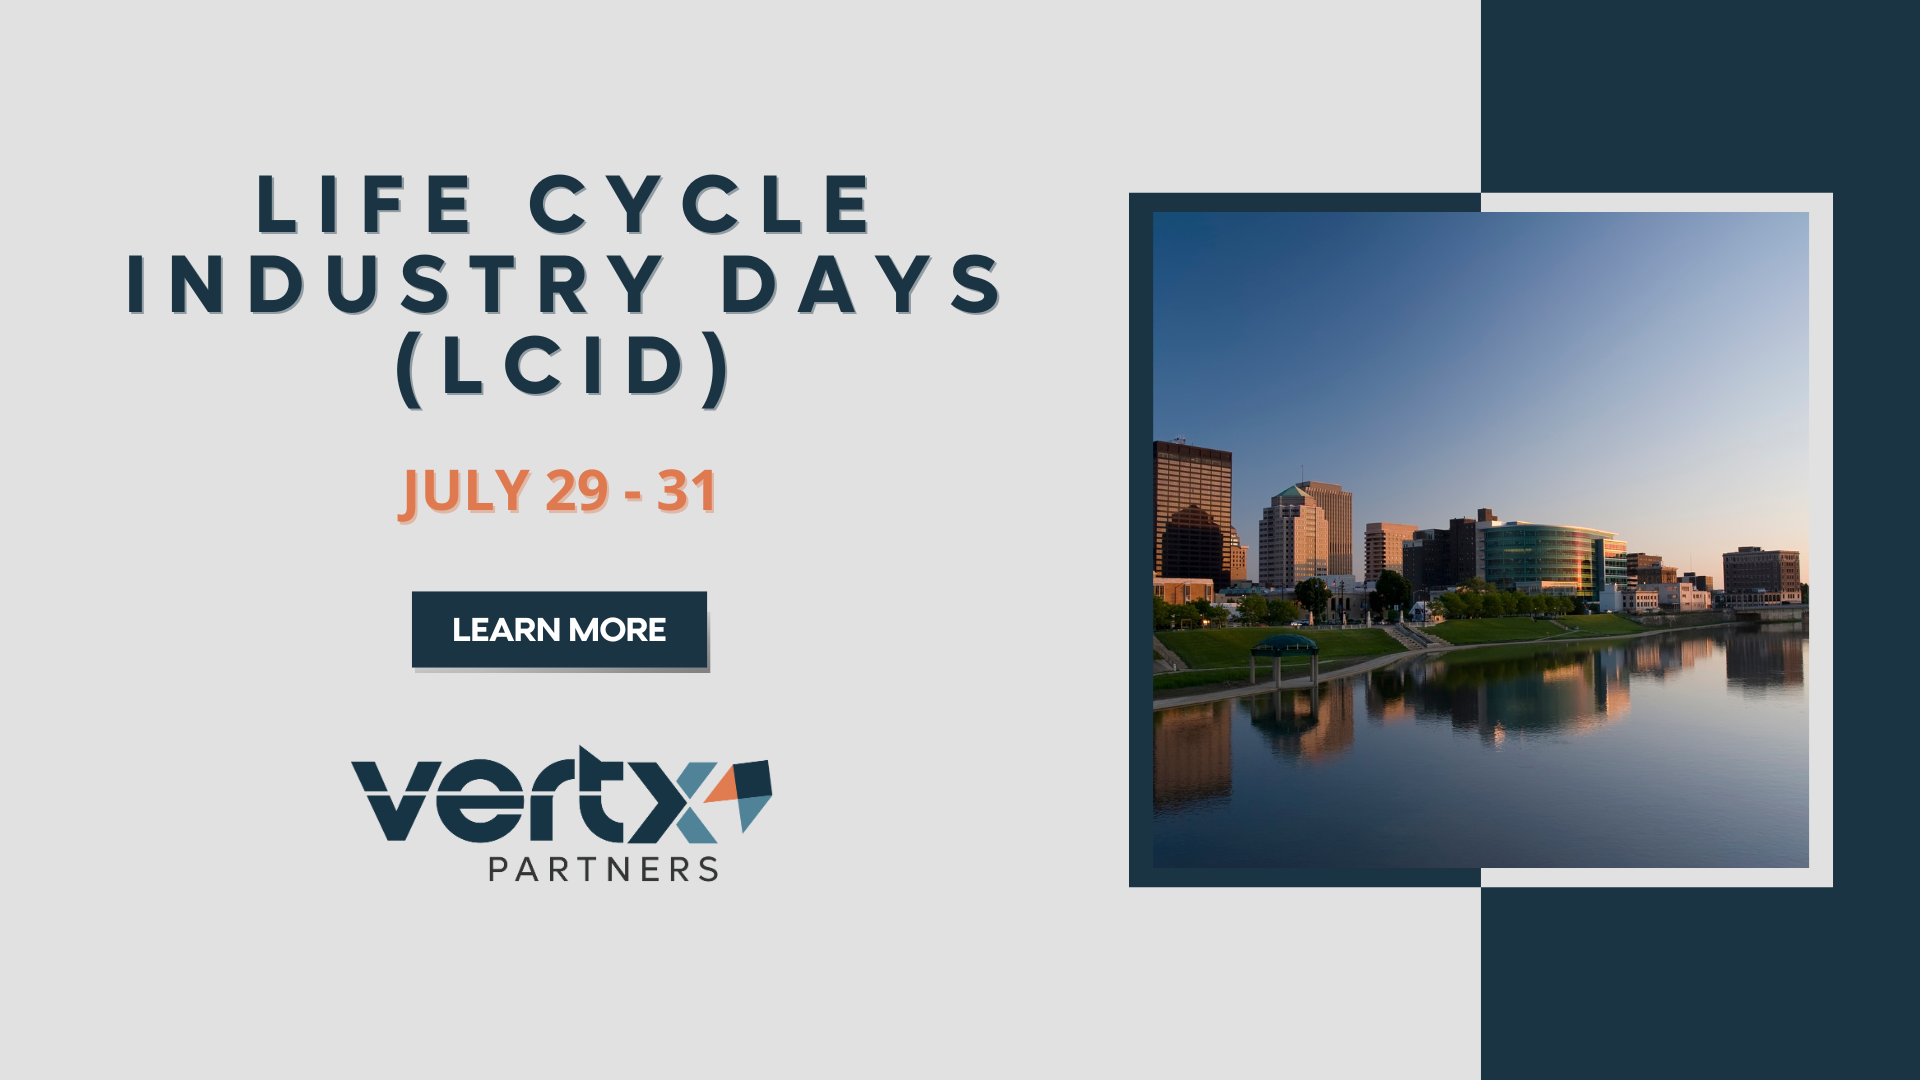 This Graphic has the title Life Cycle Industry Days (LCID) with the dates july 29-31 under it and a photo of dayton ohio's skyline next to it with a sunset in the background.